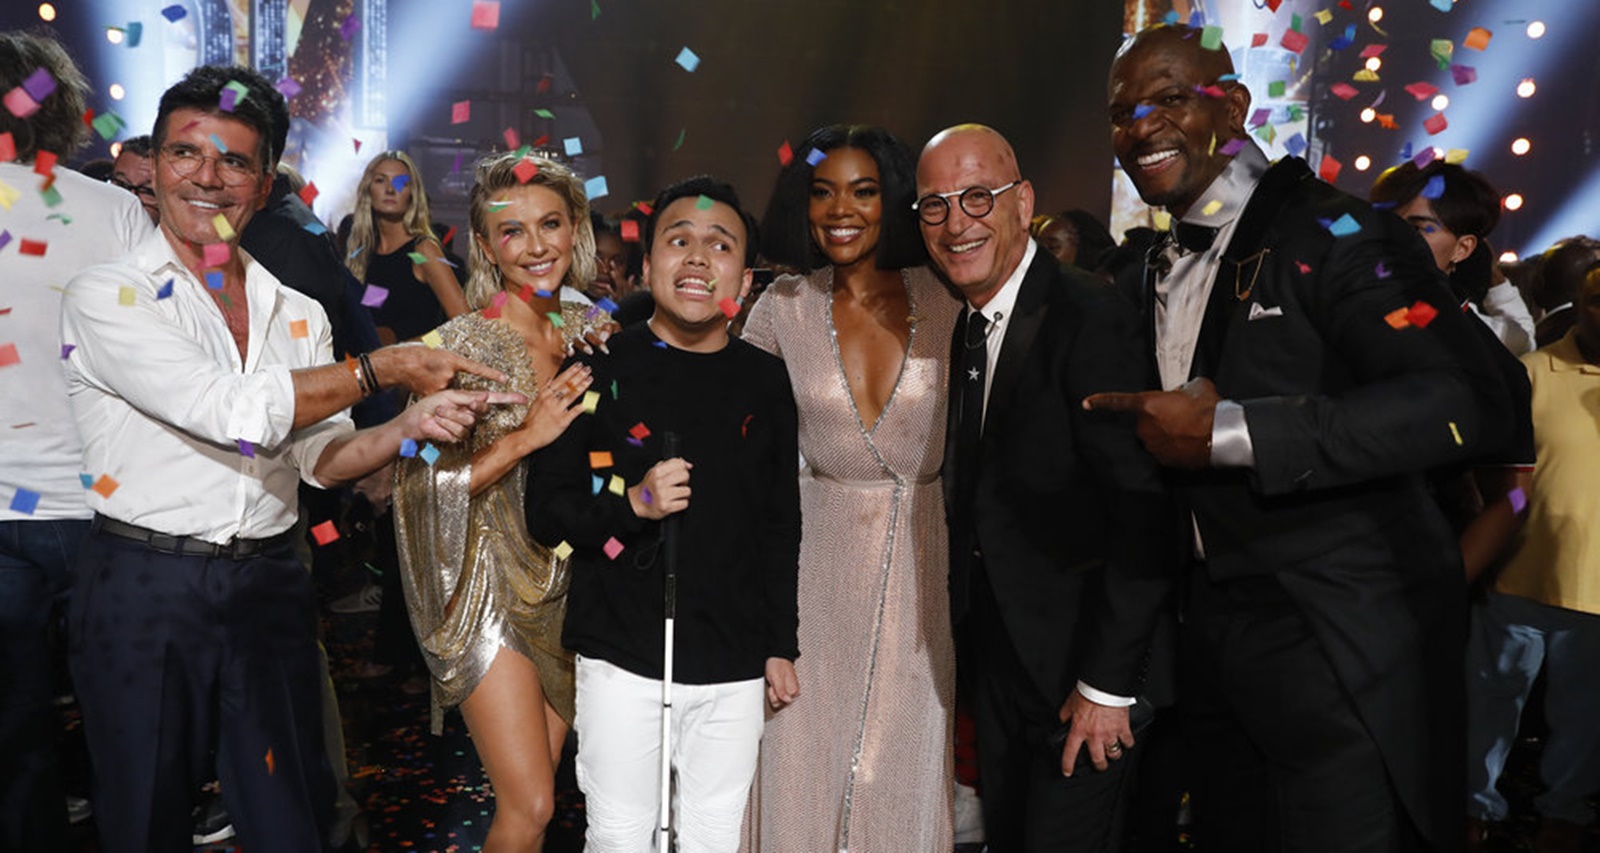 “AGT” Finale 2019: What Are The Net Worths Judges and Guest Performers?